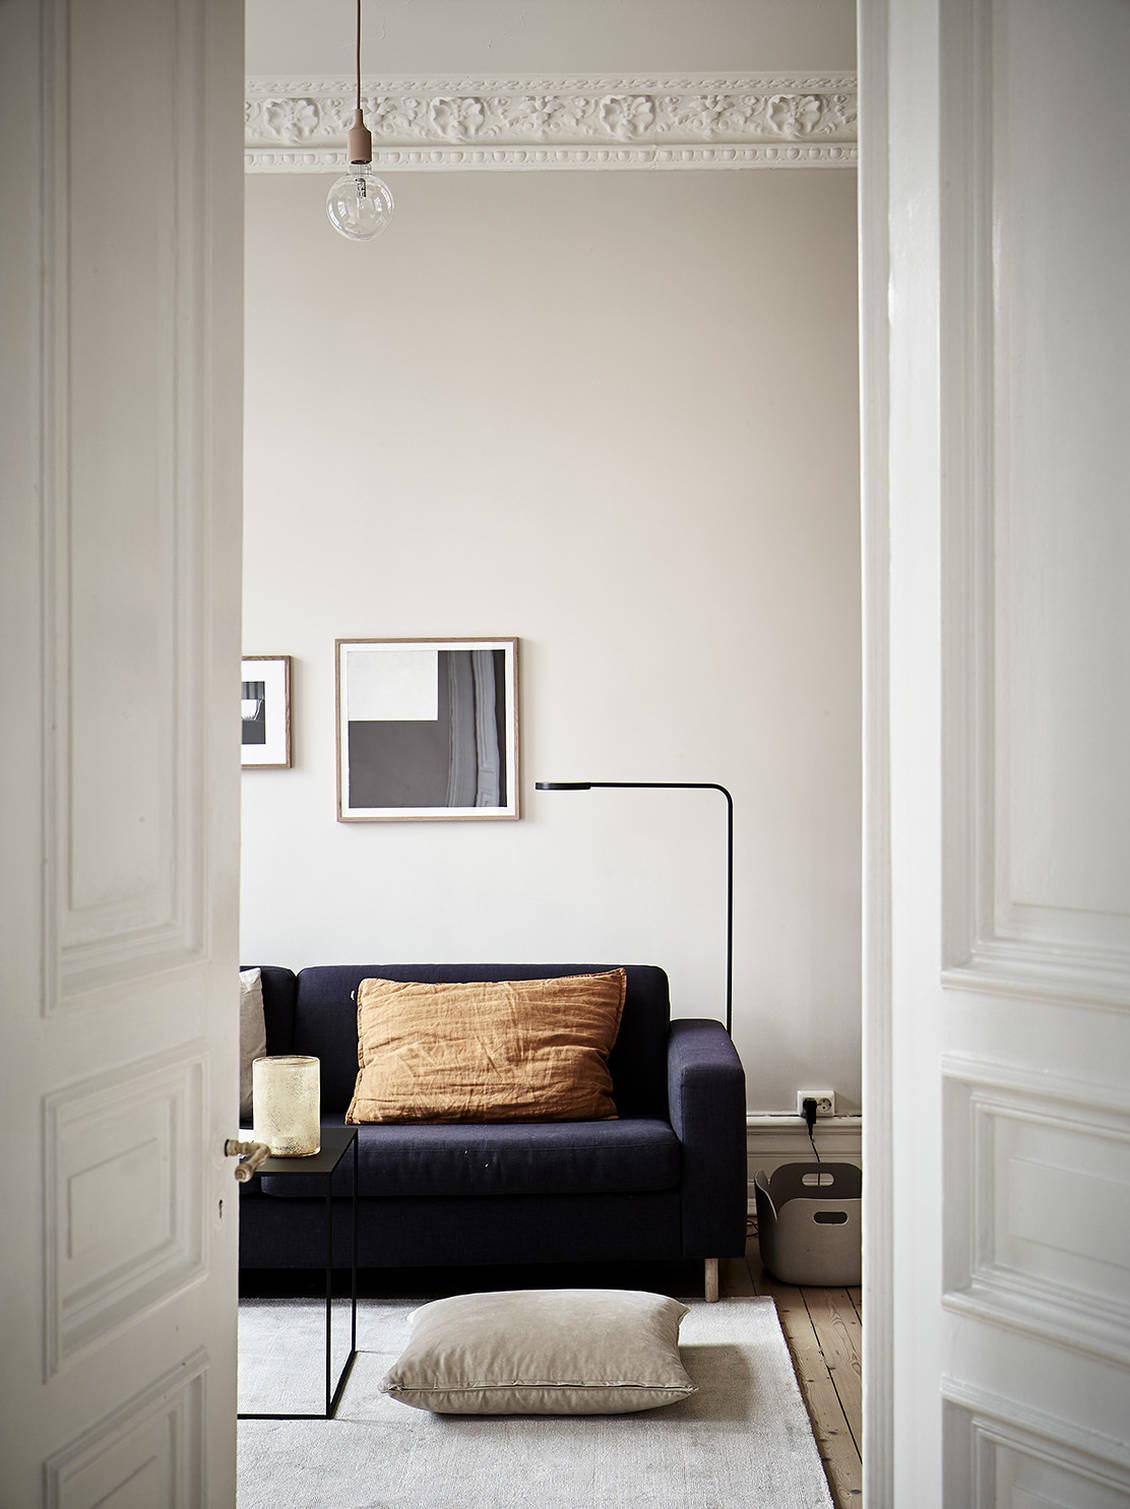 Beige minimalism in a turn of the century home - via Coco Lapine Design ...